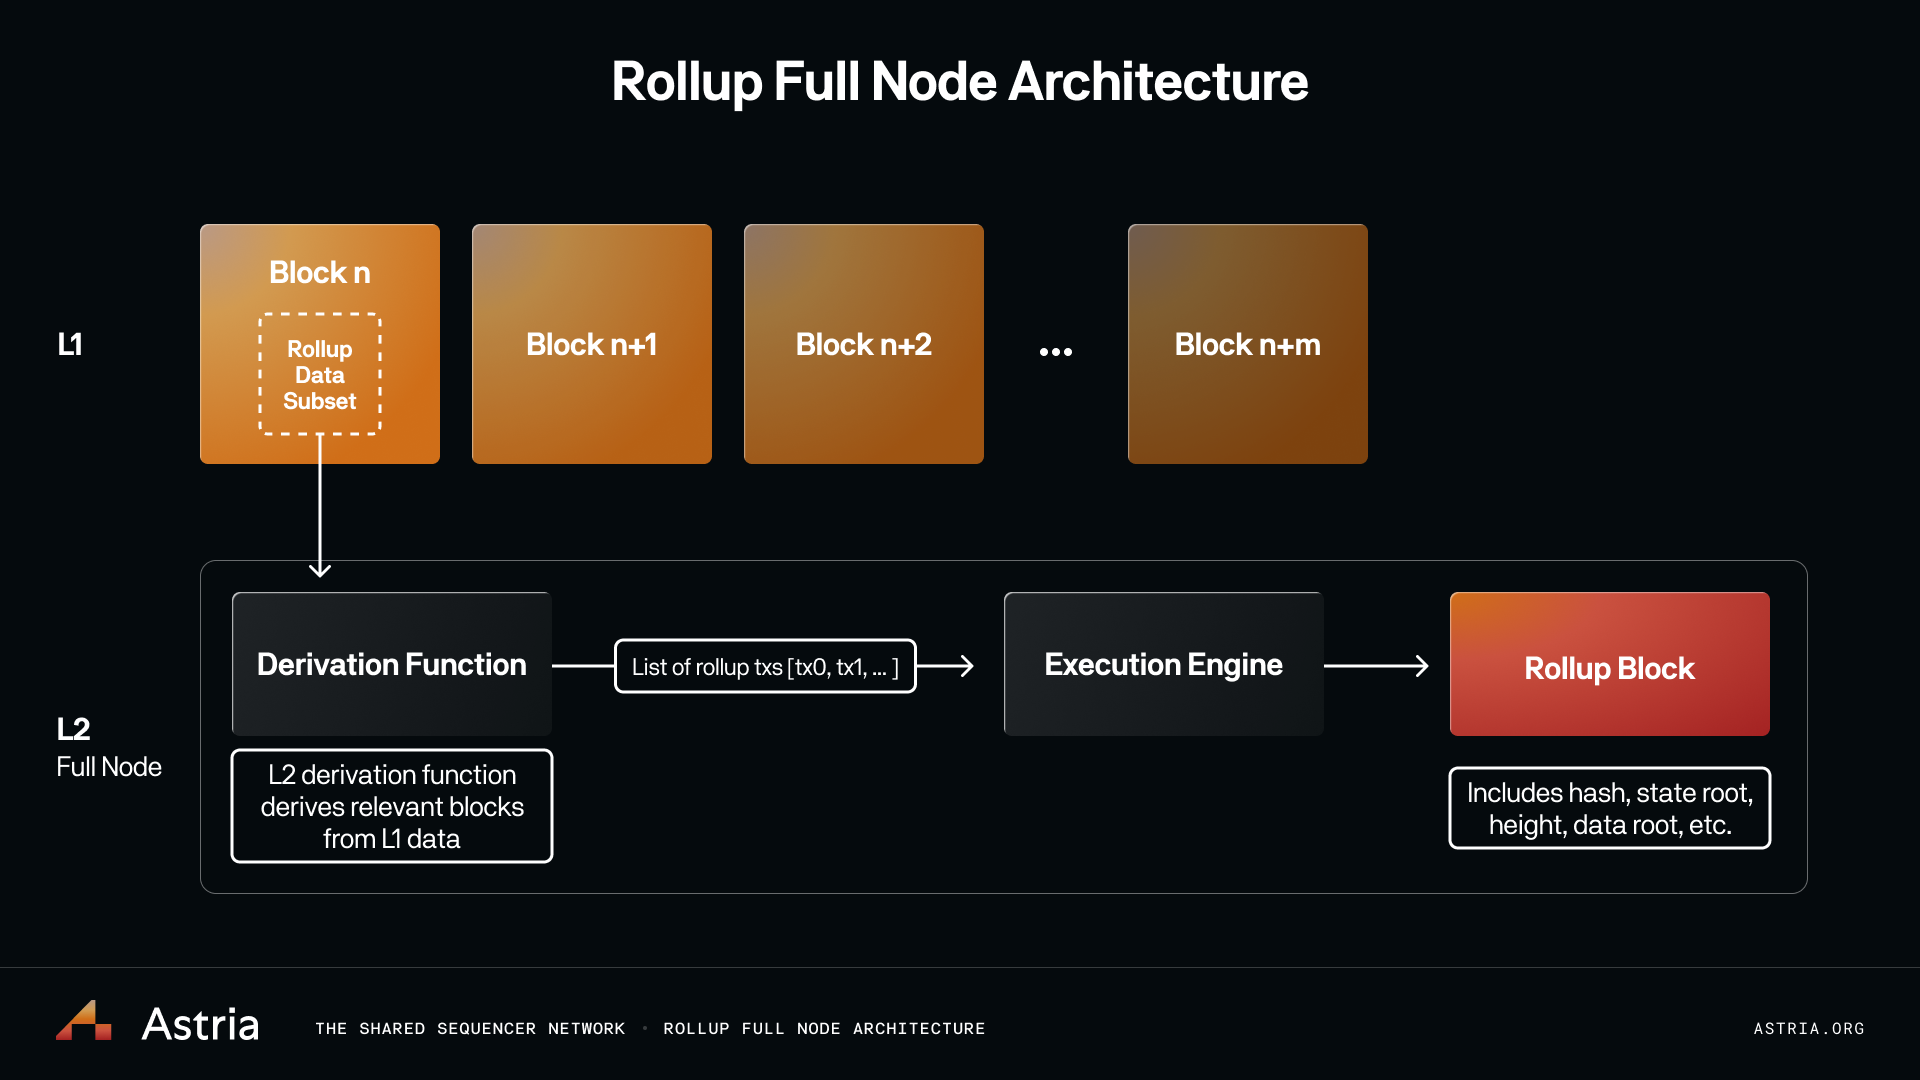 Rollup Full Node Architecture